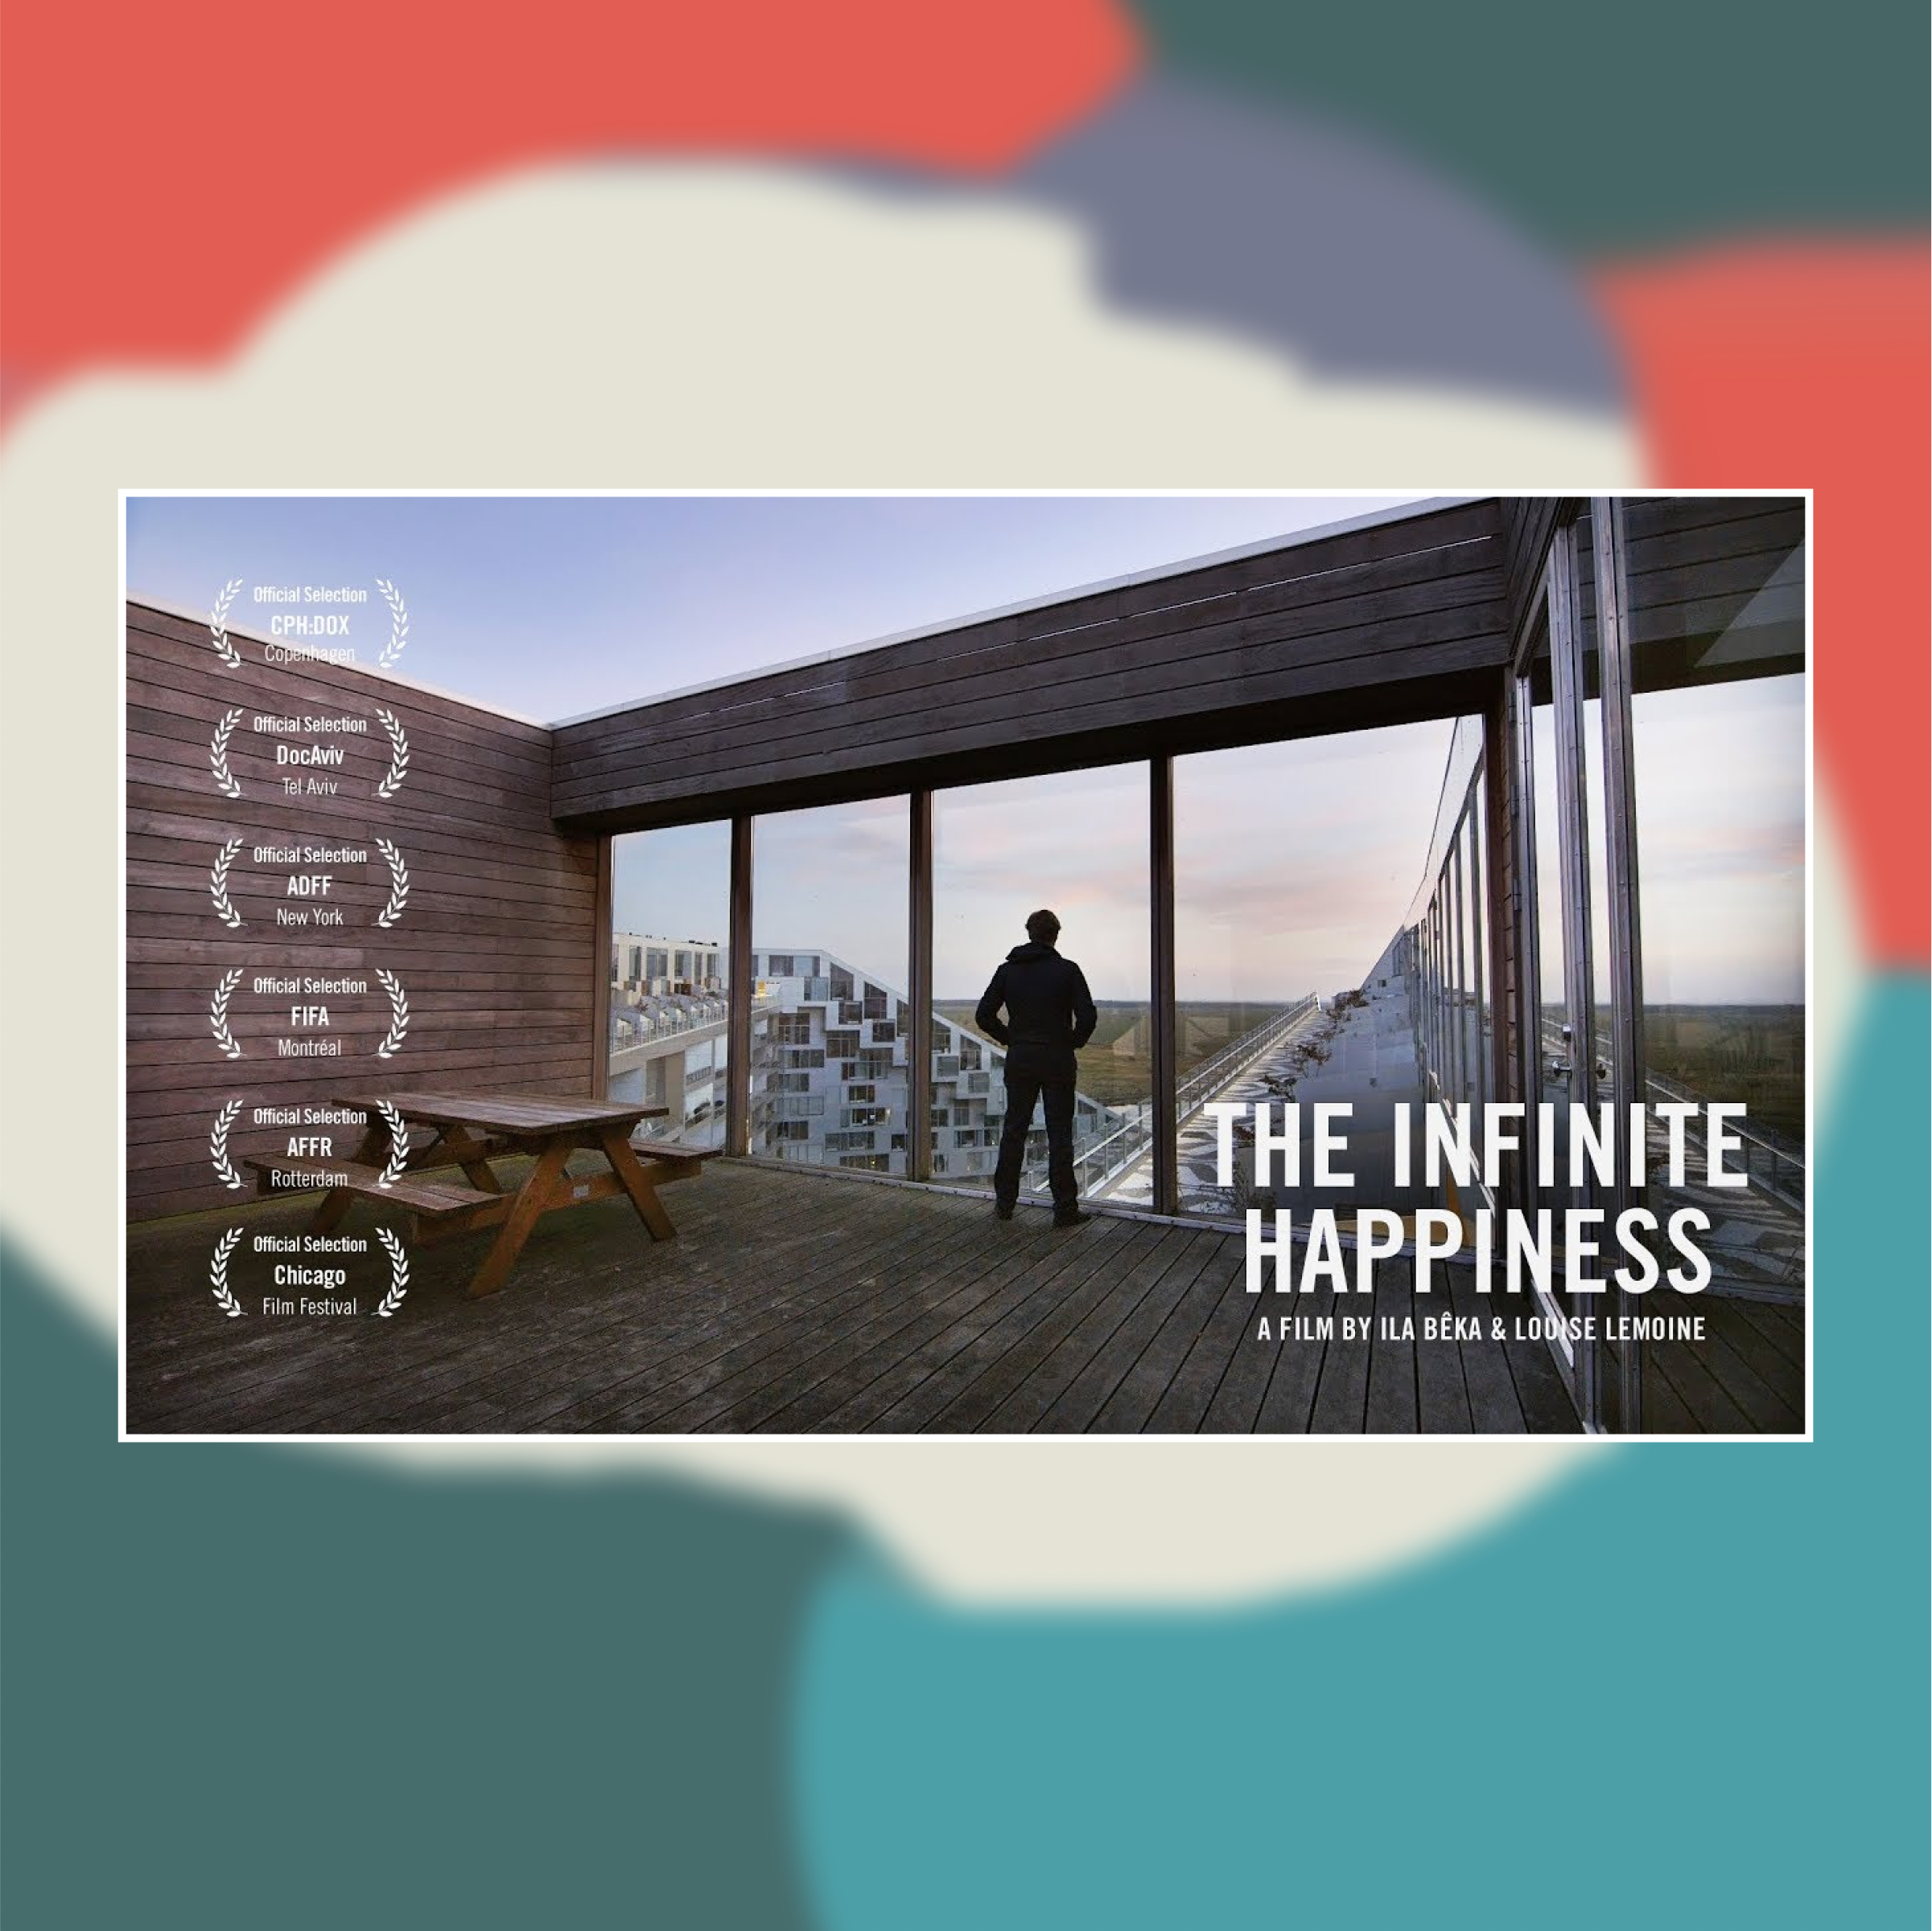 Movie cover of The Infinite Happiness against a painted abstract background